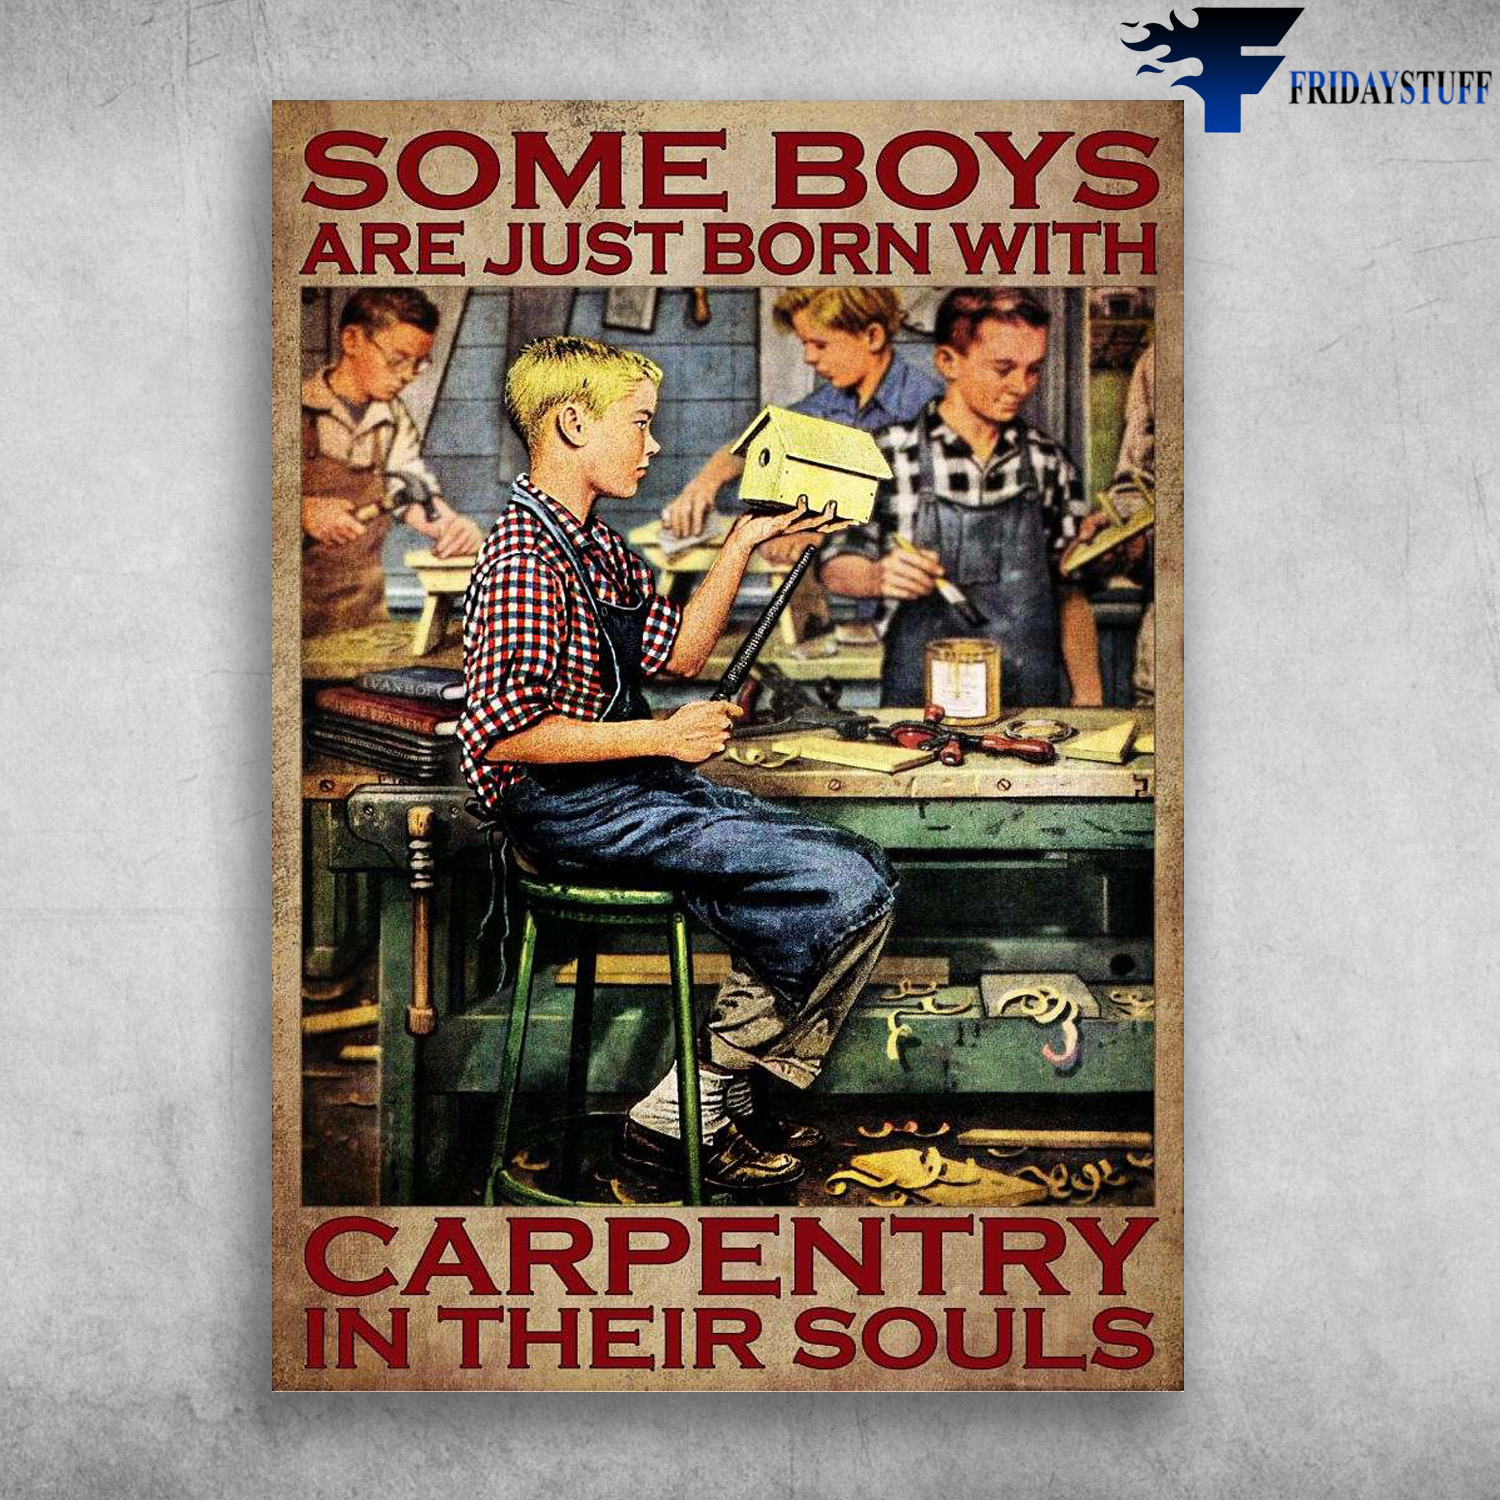 Carpentry Boy - Some Boys Are Just Born With, Carpentry In Their Souls